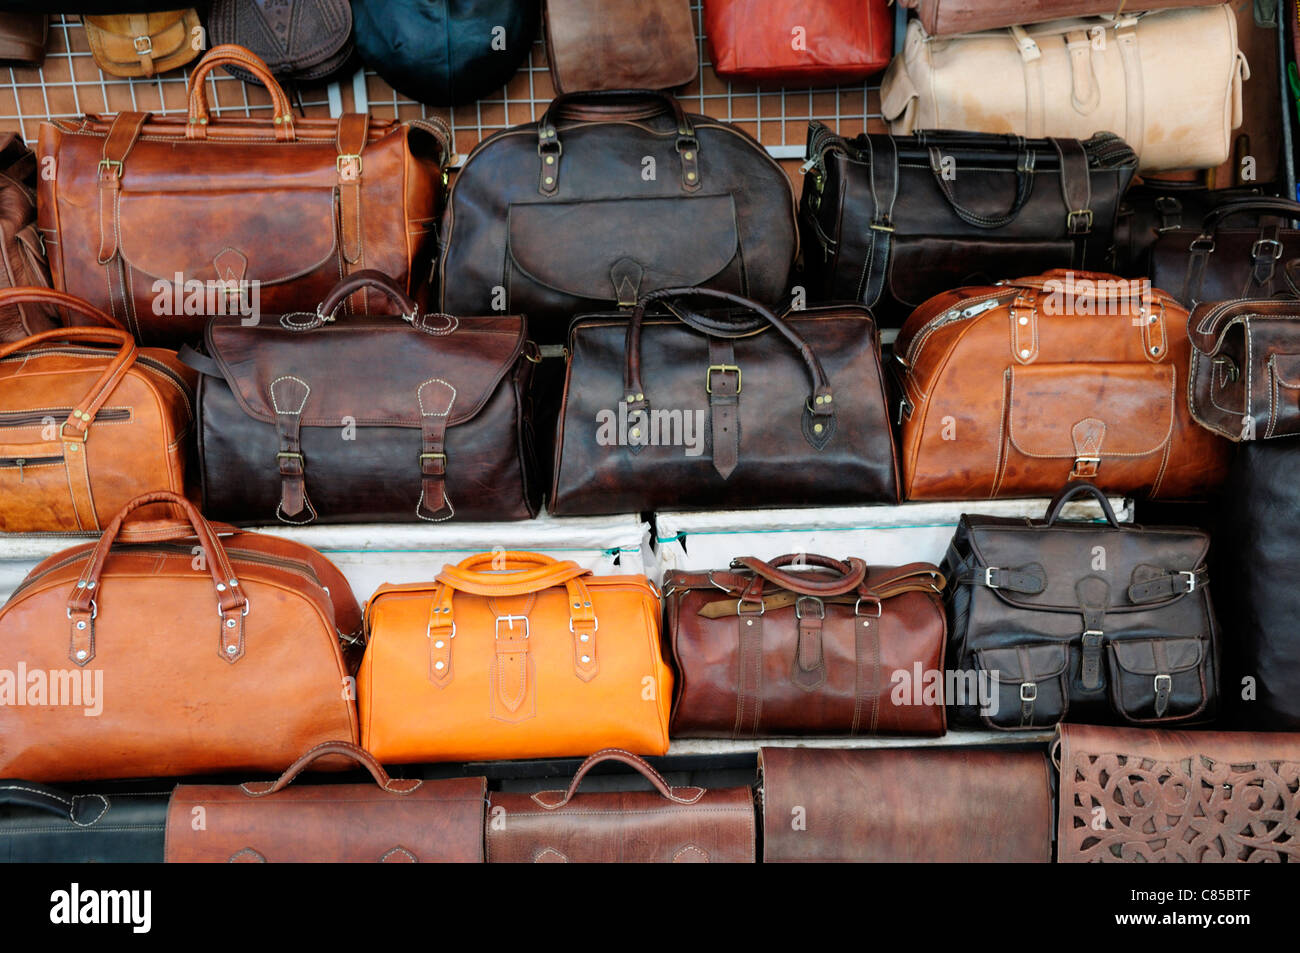 Leather Bags for Sale, Marrakech, Morocco Stock Photo: 39457055 - Alamy